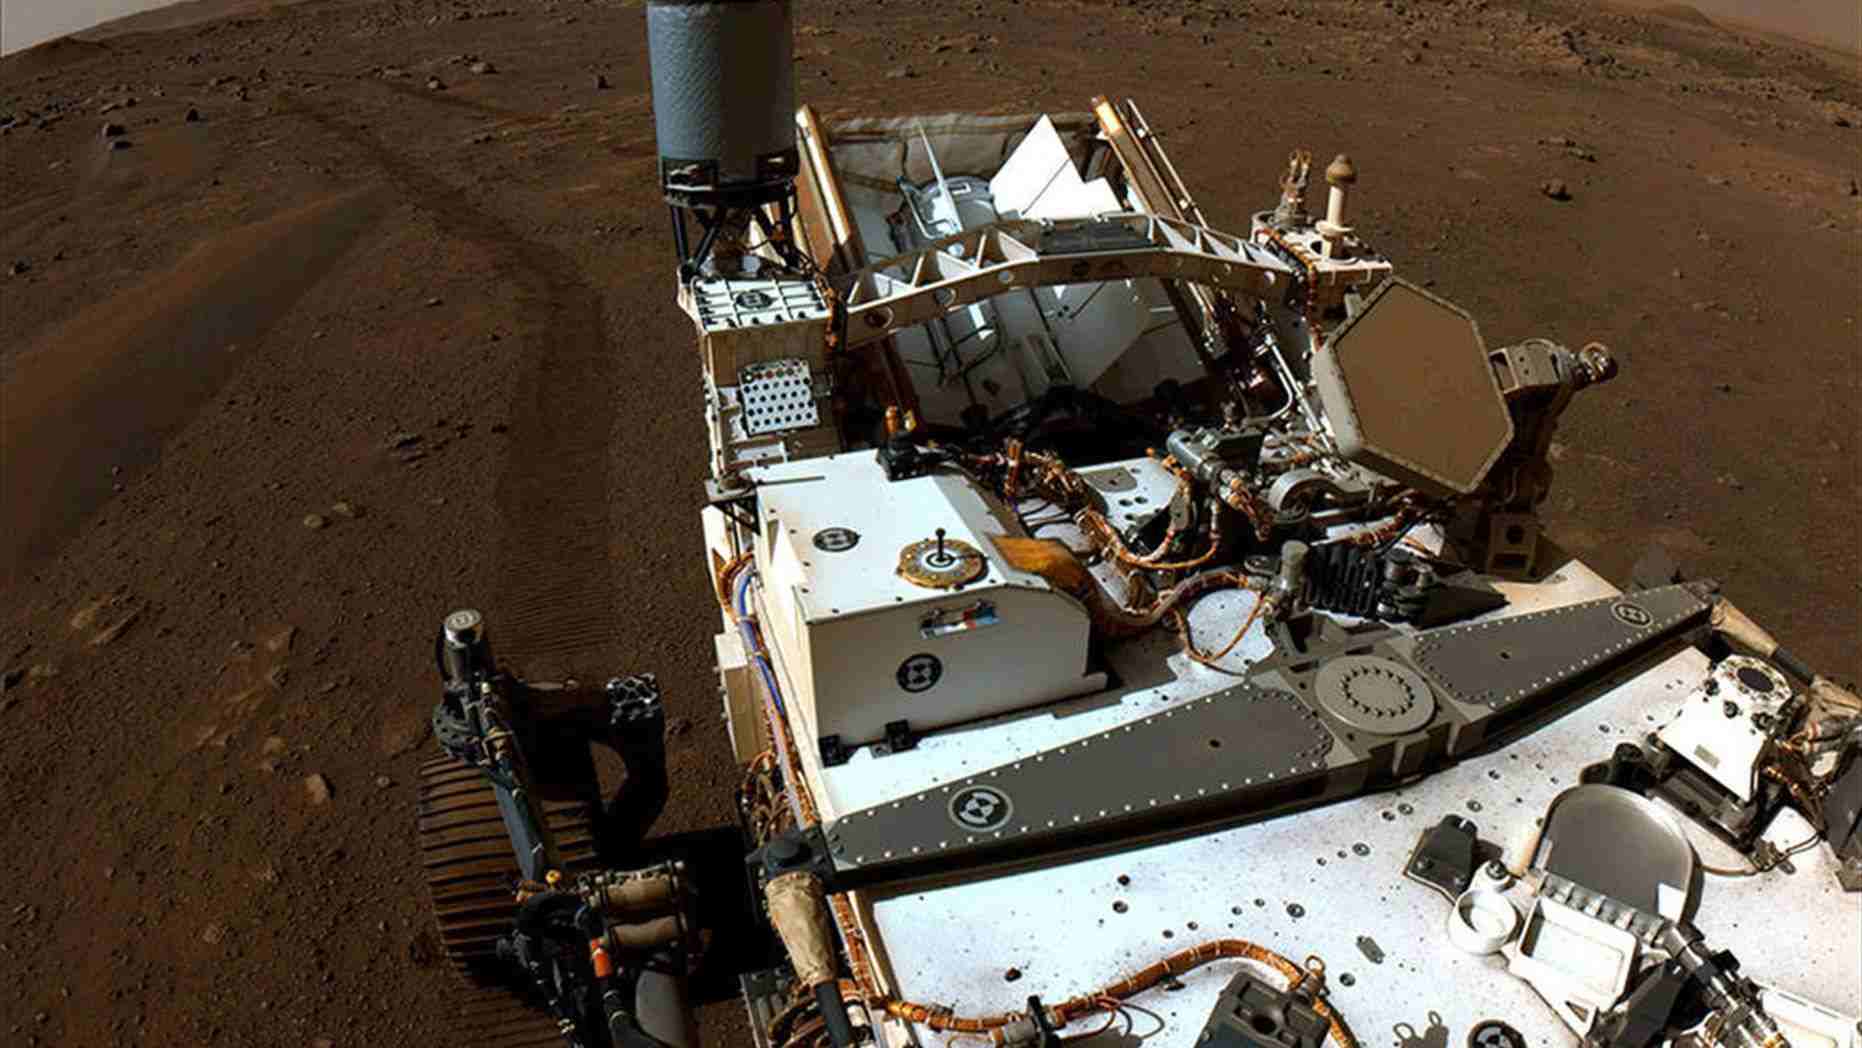 Mars images show Perseverance rover at work